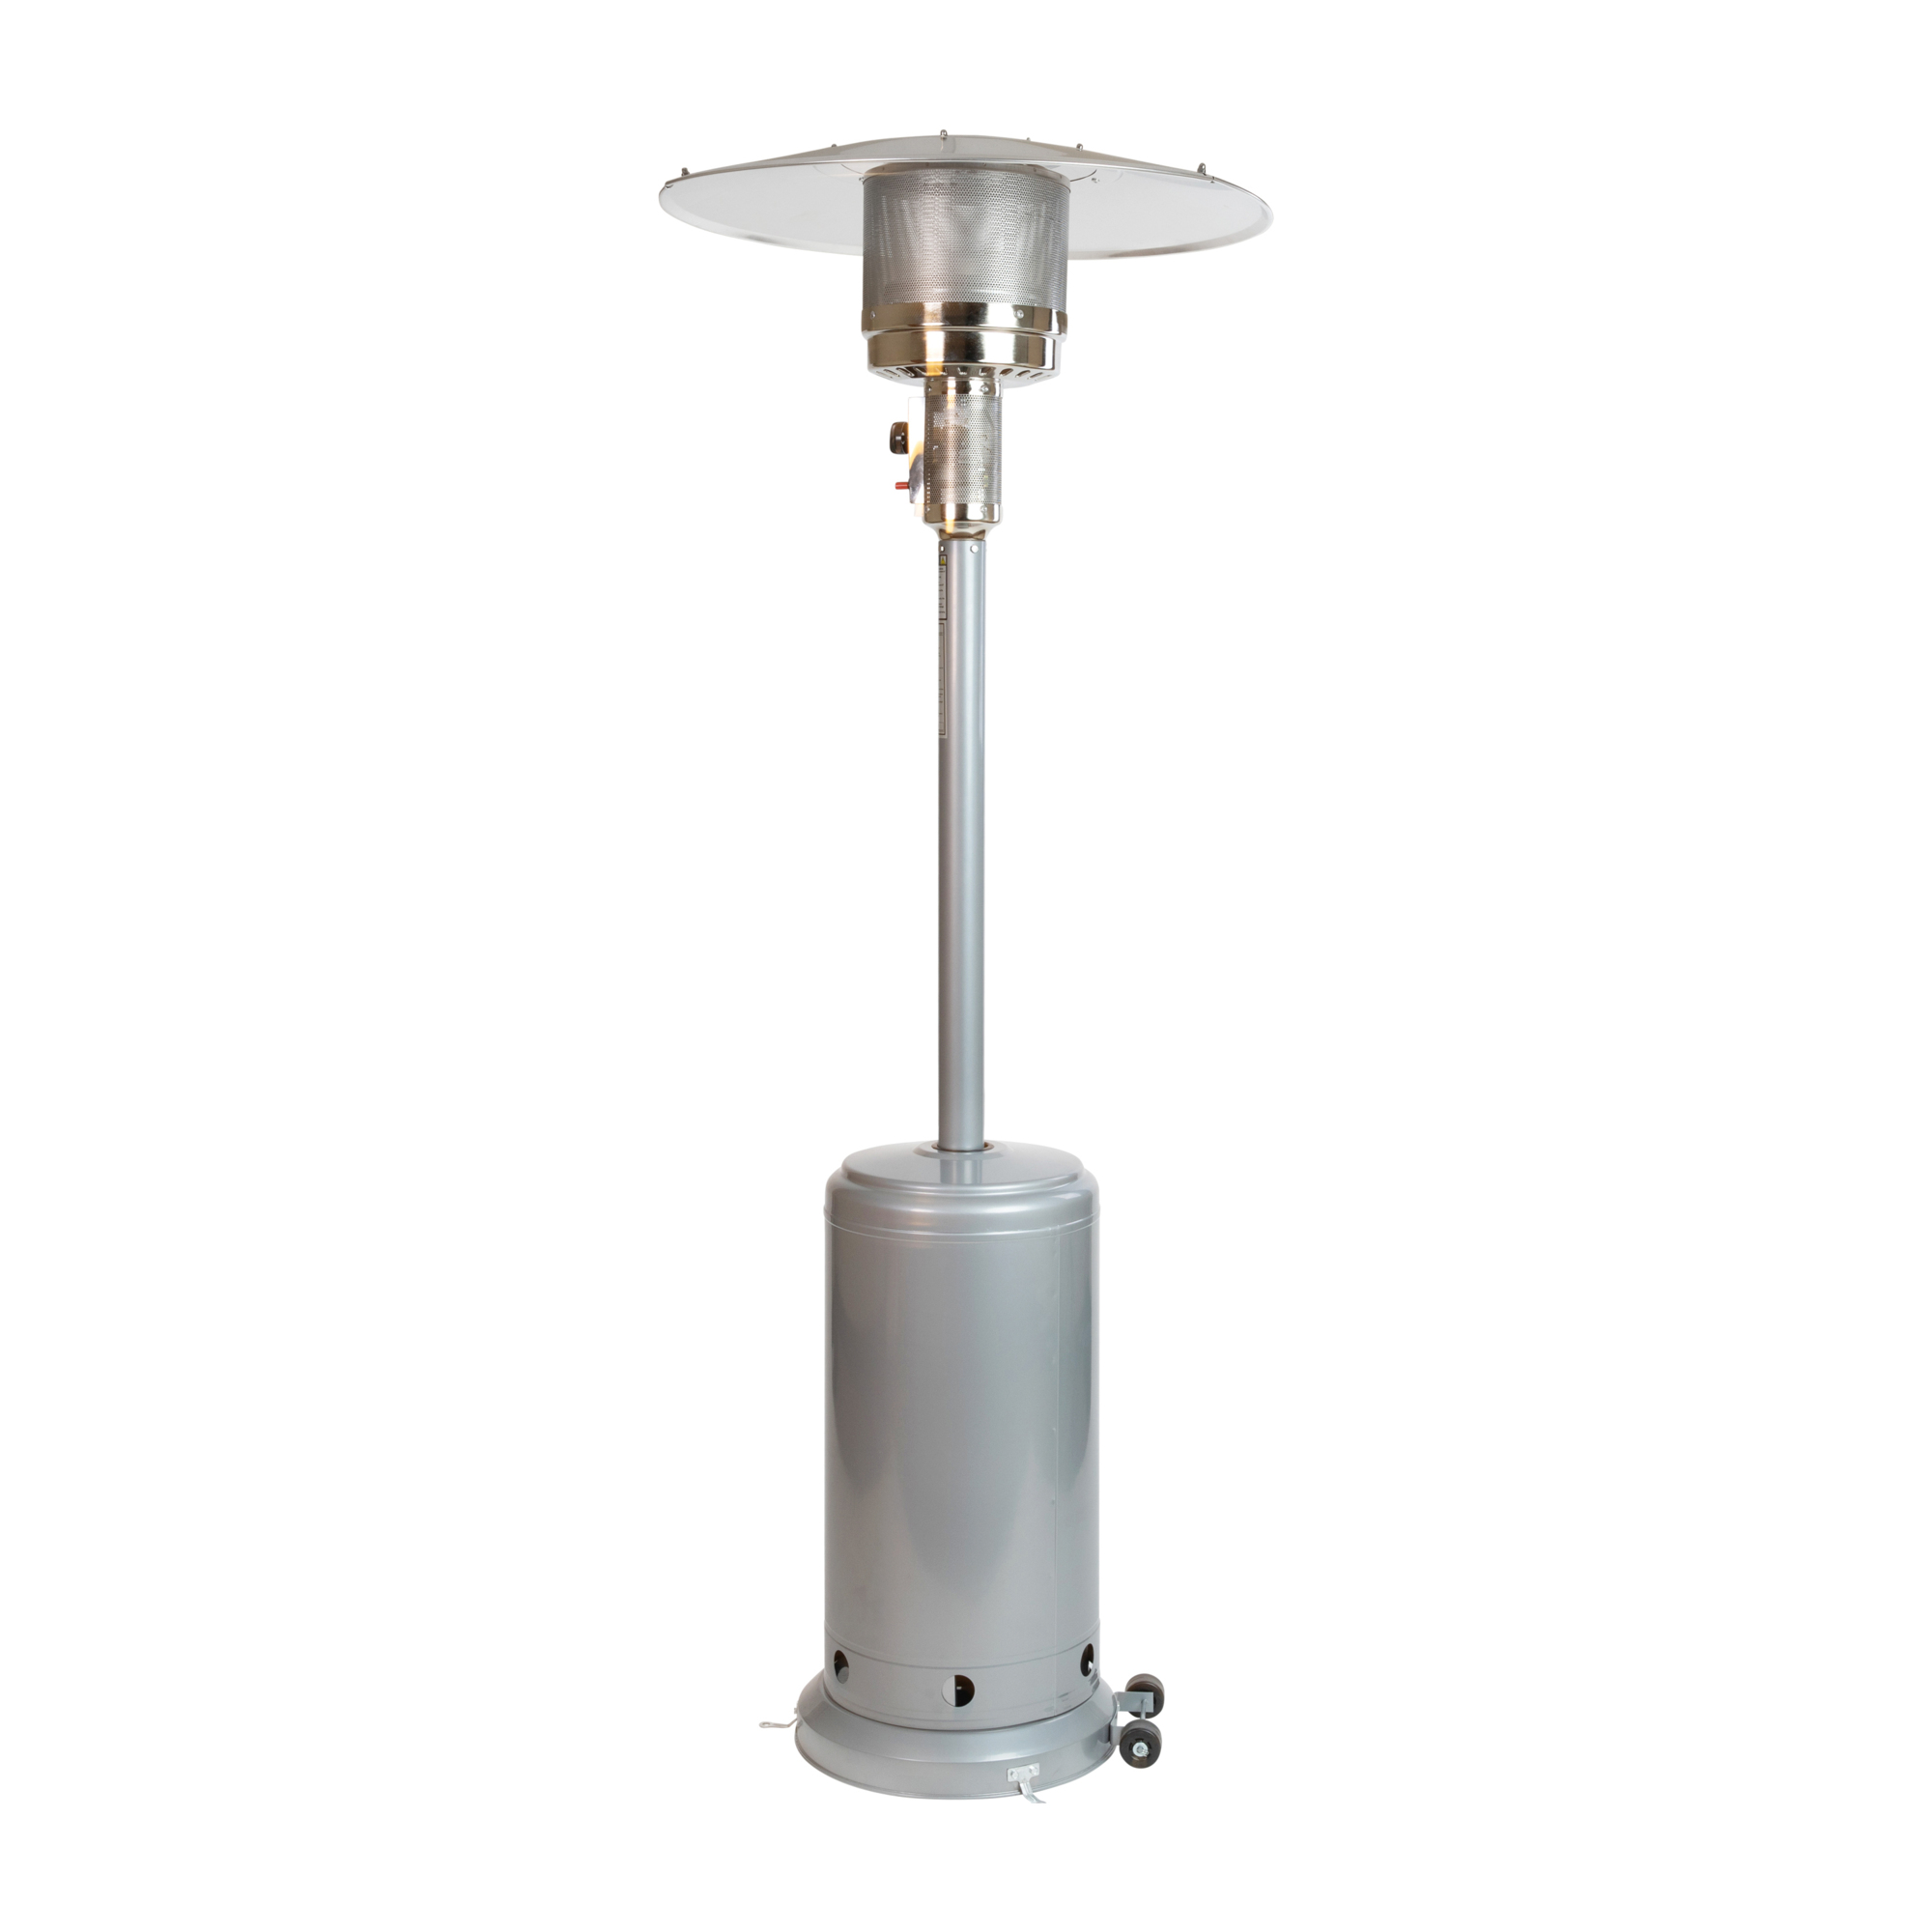 Flash Furniture, Round Outdoor Patio Heater - Silver -7.5ft. Tall, Fuel Type Propane, Material Stainless Steel, Model NANHSSAGHSL